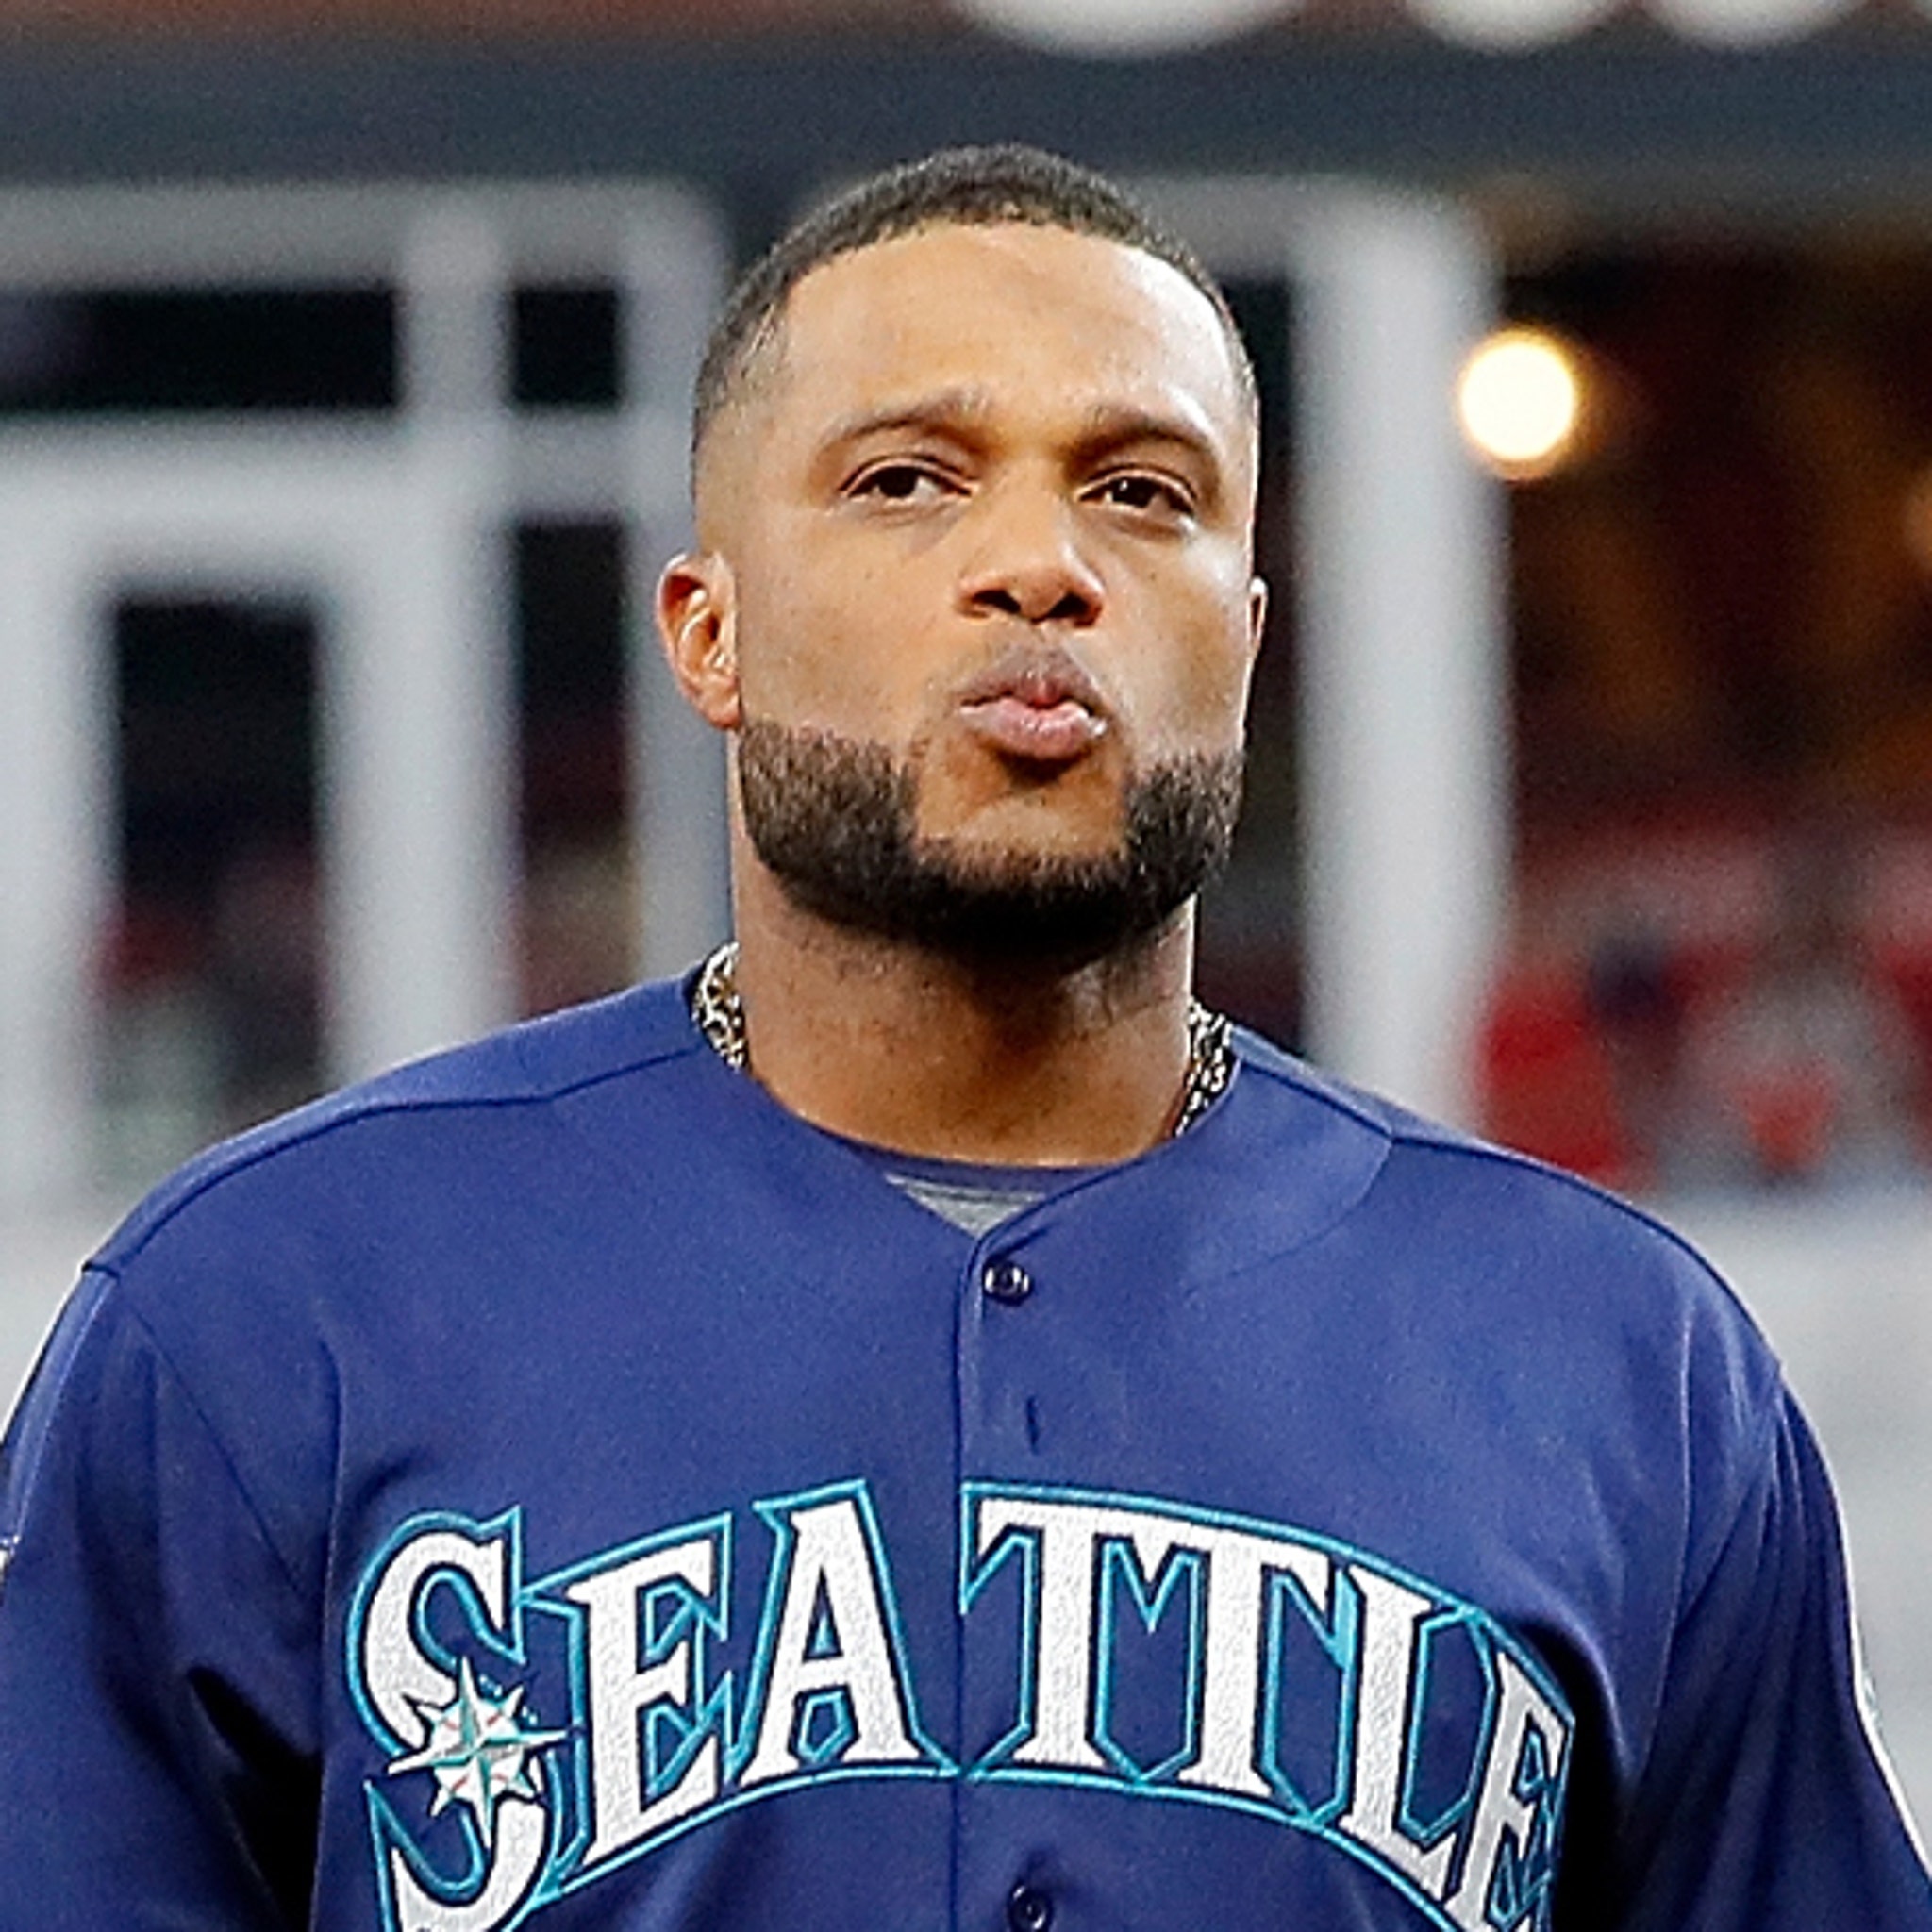 Robinson Cano has been suspended 80 games - Bloomberg